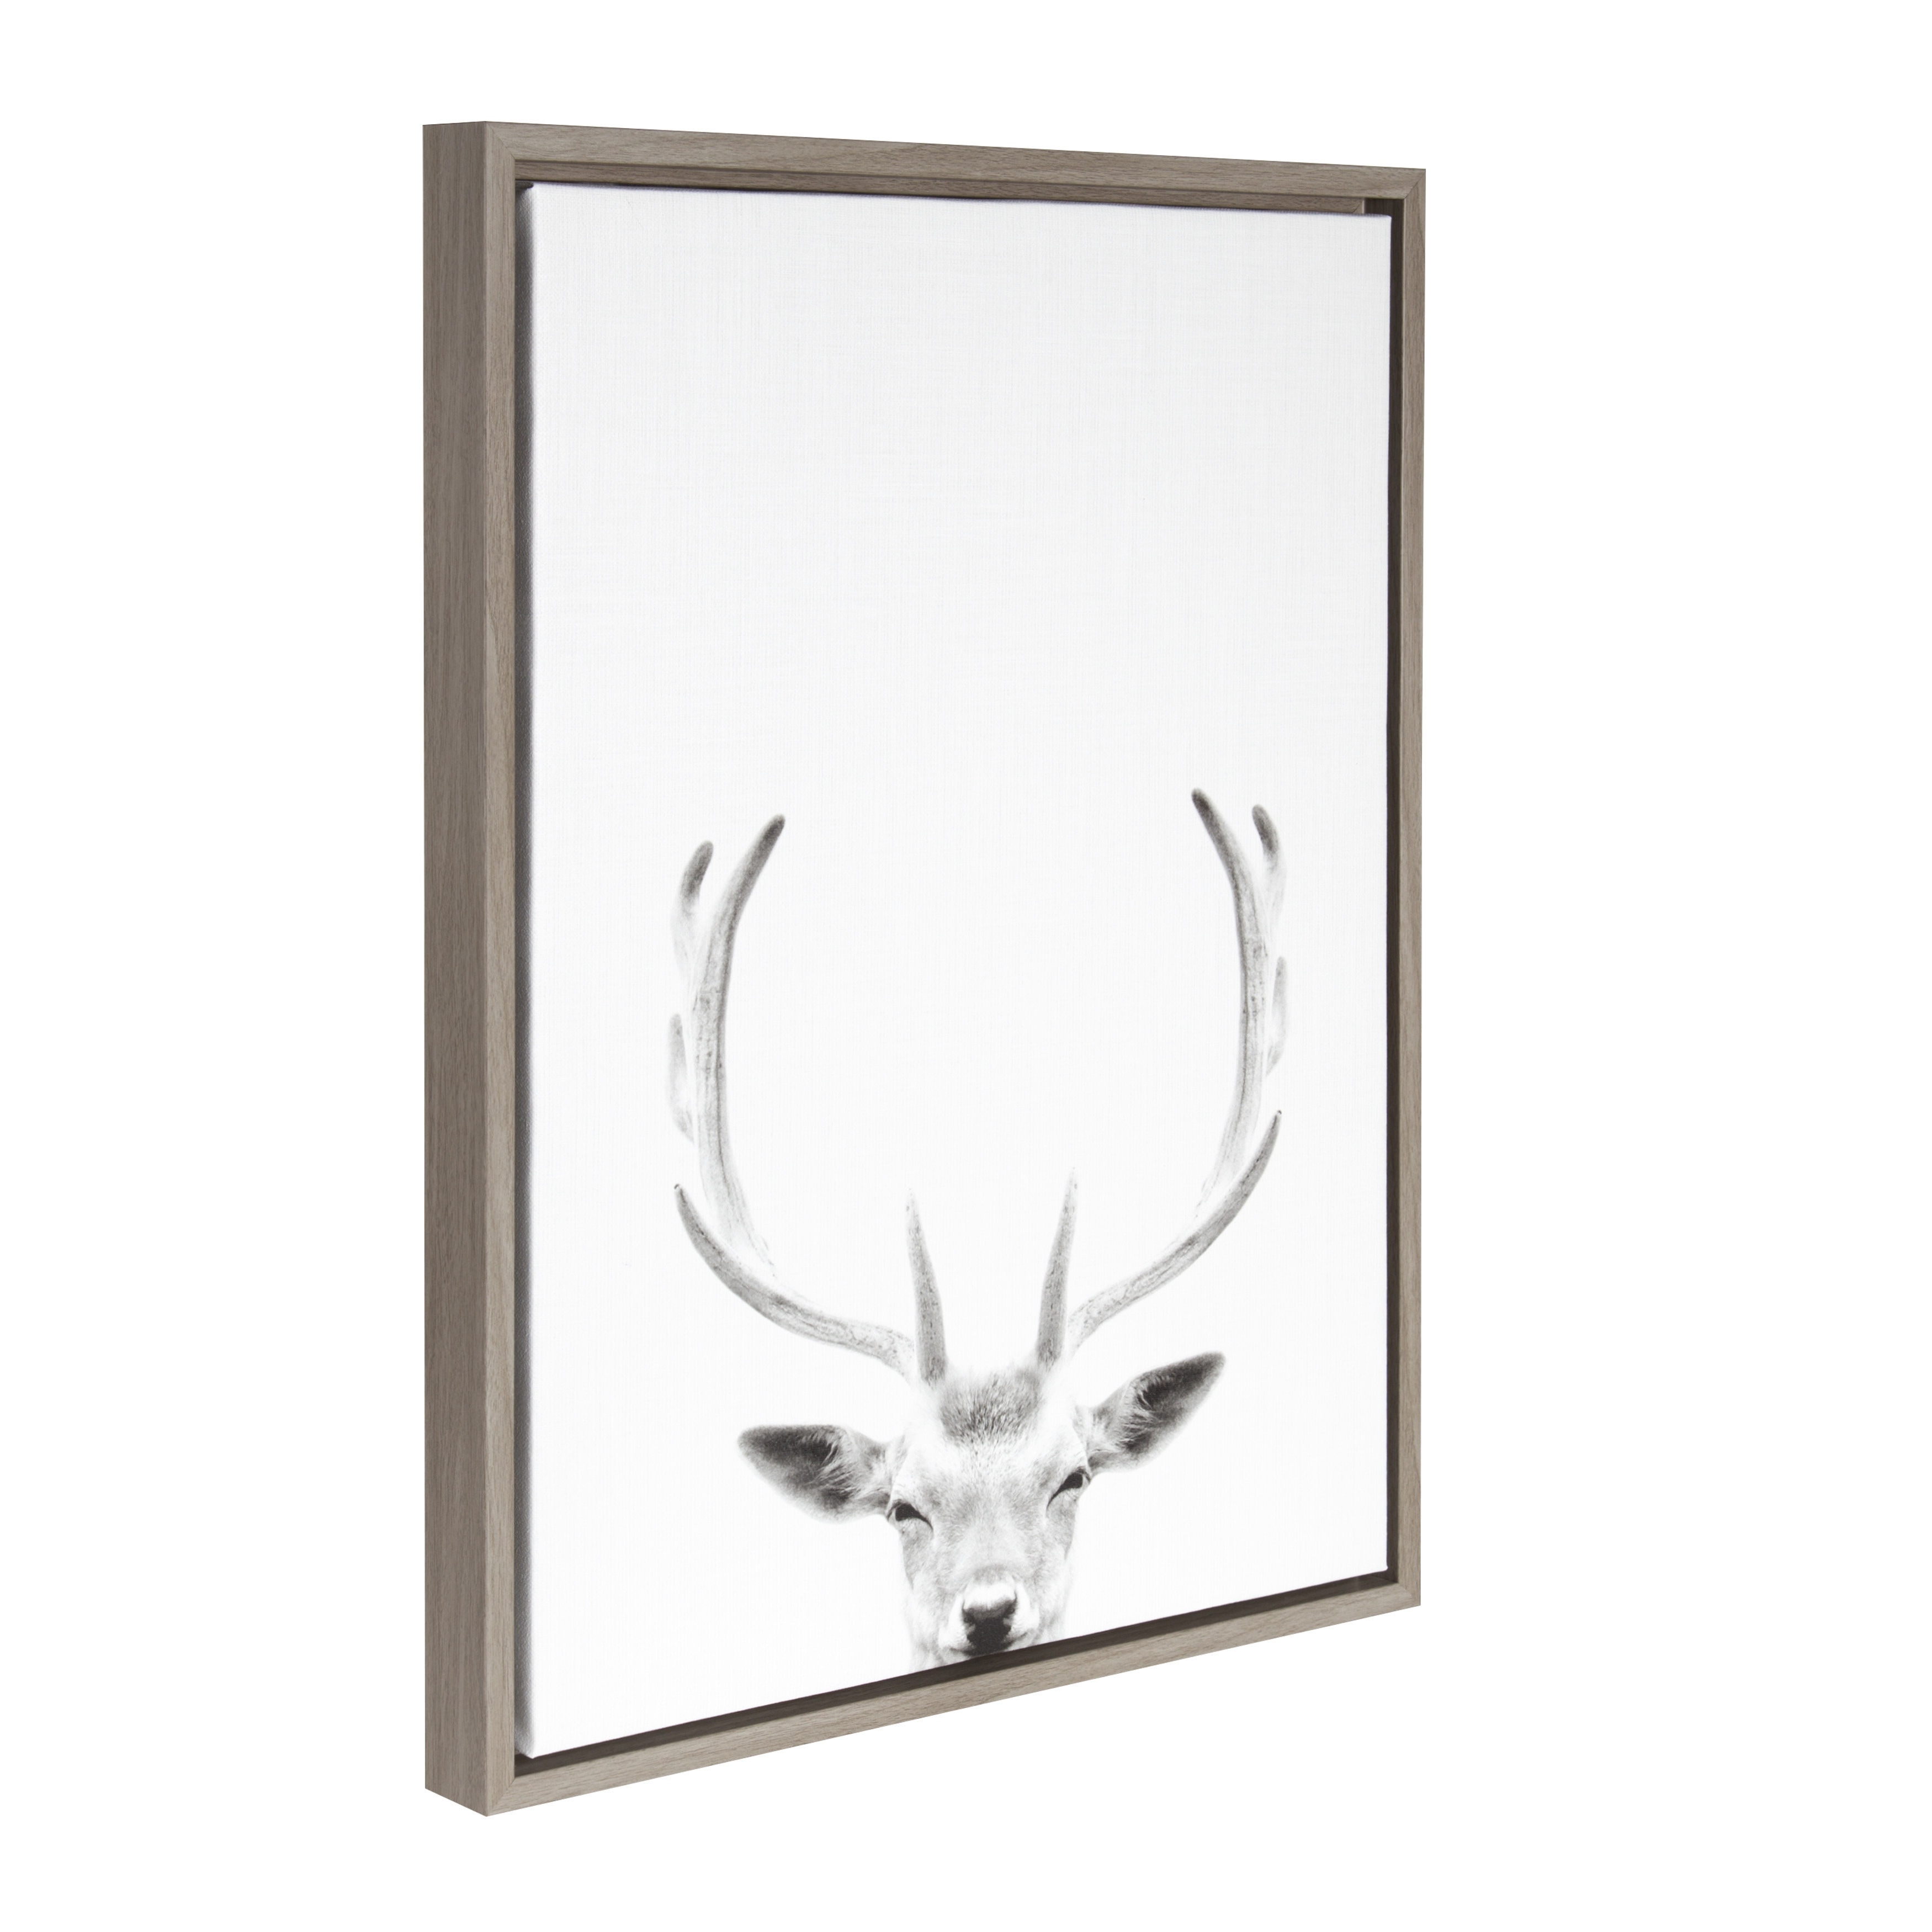 Kate and Laurel Sylvie Deer with Antlers Black and White Portrait Framed  Canvas Wall Art by Simon Te Tai, 18x24 Gray On Sale Bed Bath  Beyond  15614314